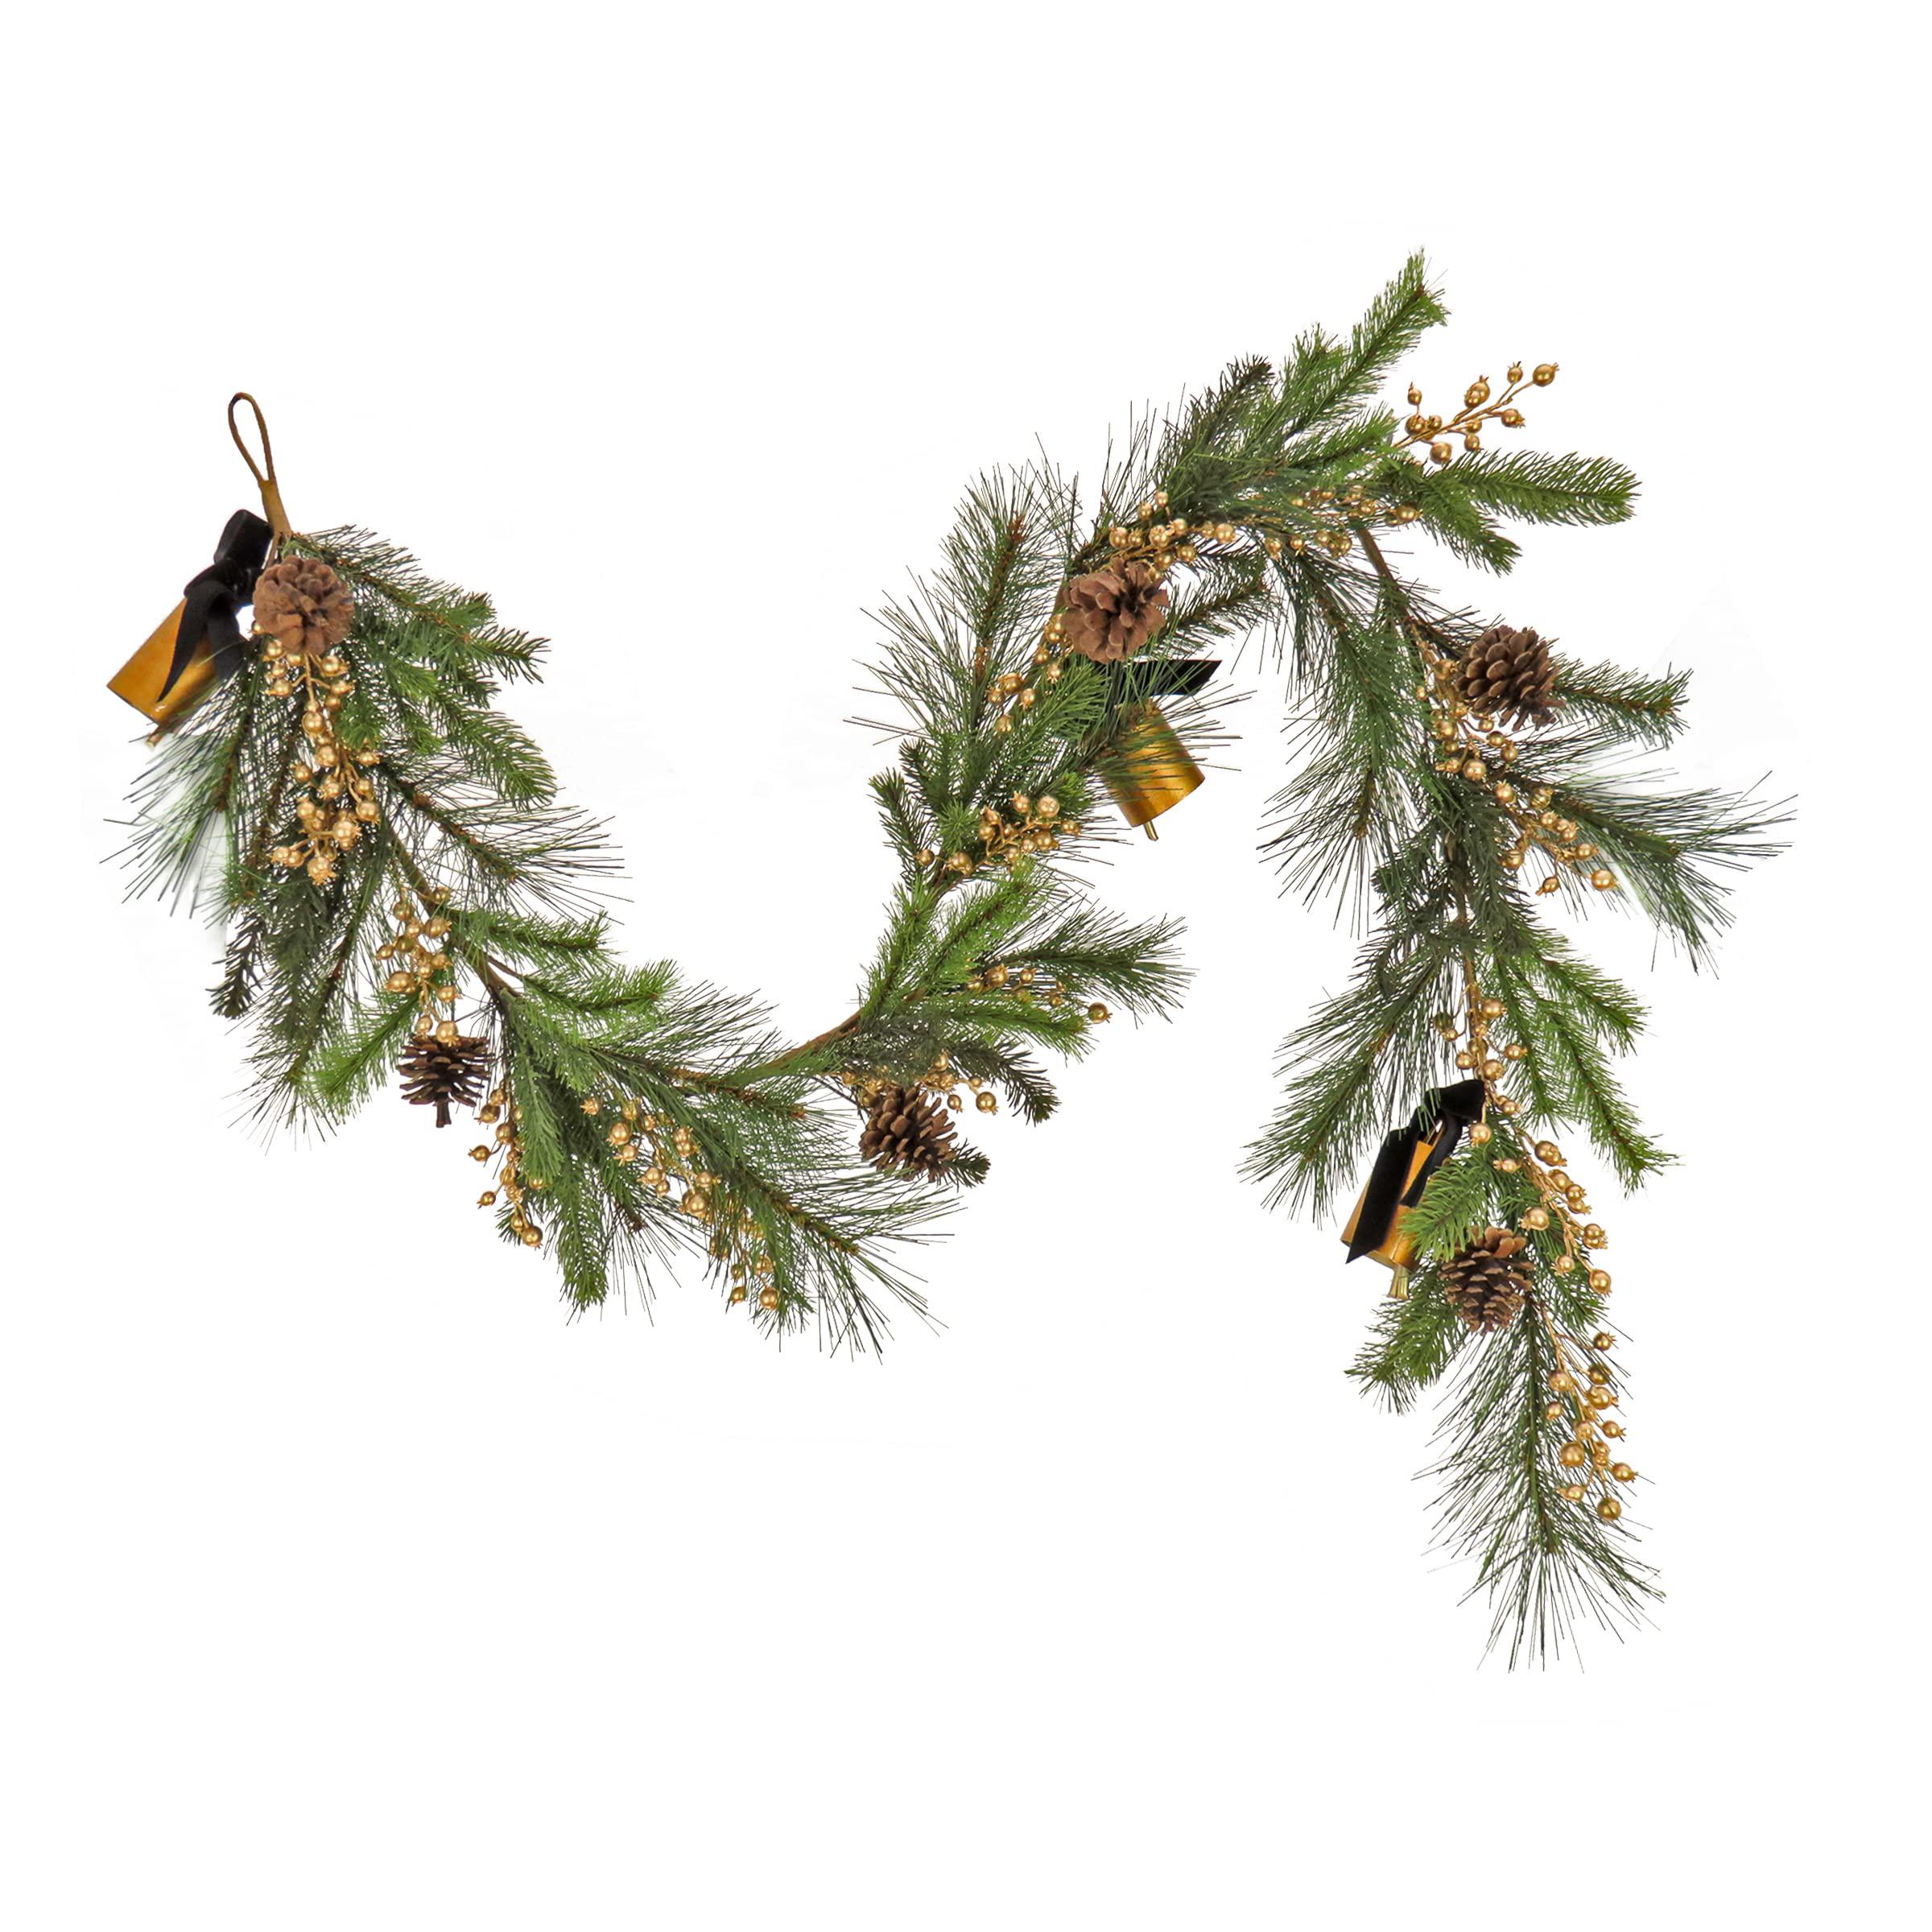 National Tree Company hgtv home collection unlit artificial christmas garland, mixed branch tips, flexible vine base, unlit, 72 inches